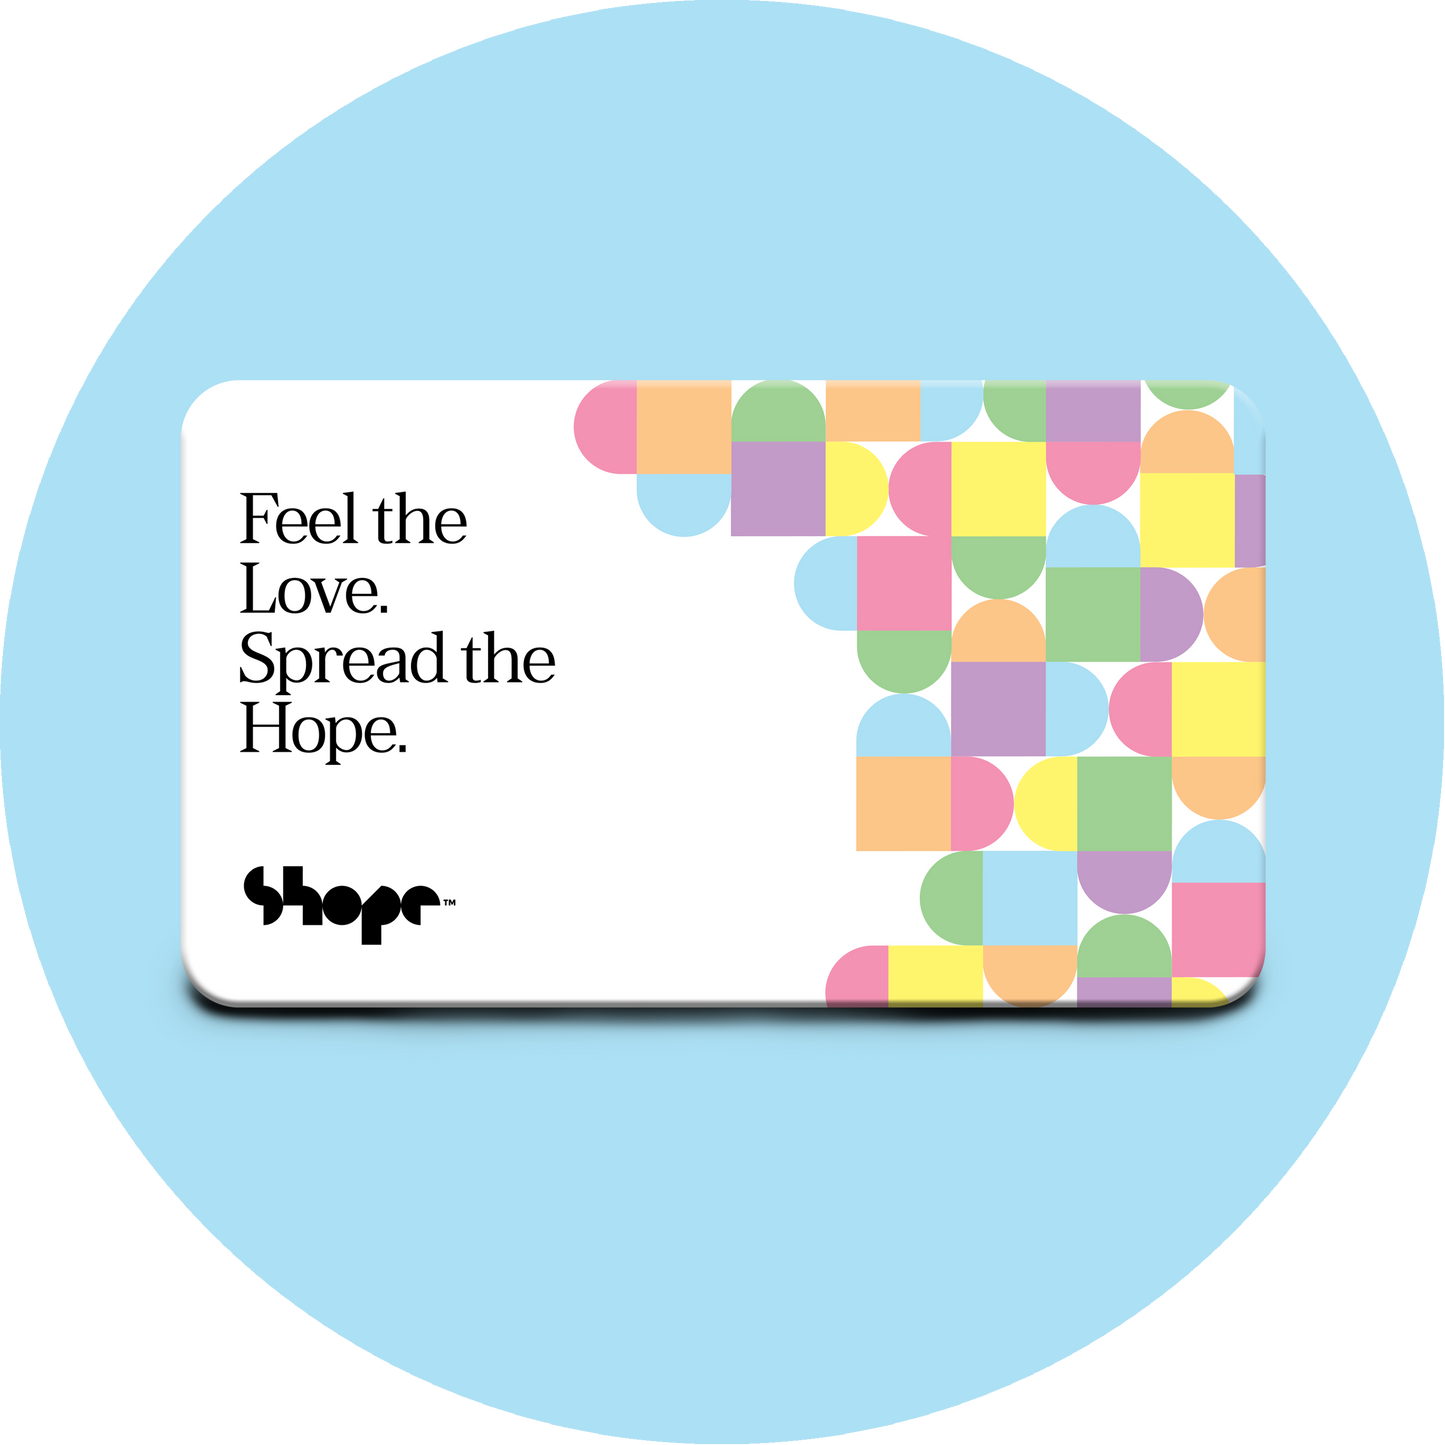 Feel the love, spread the hope gift card against blue circle background.